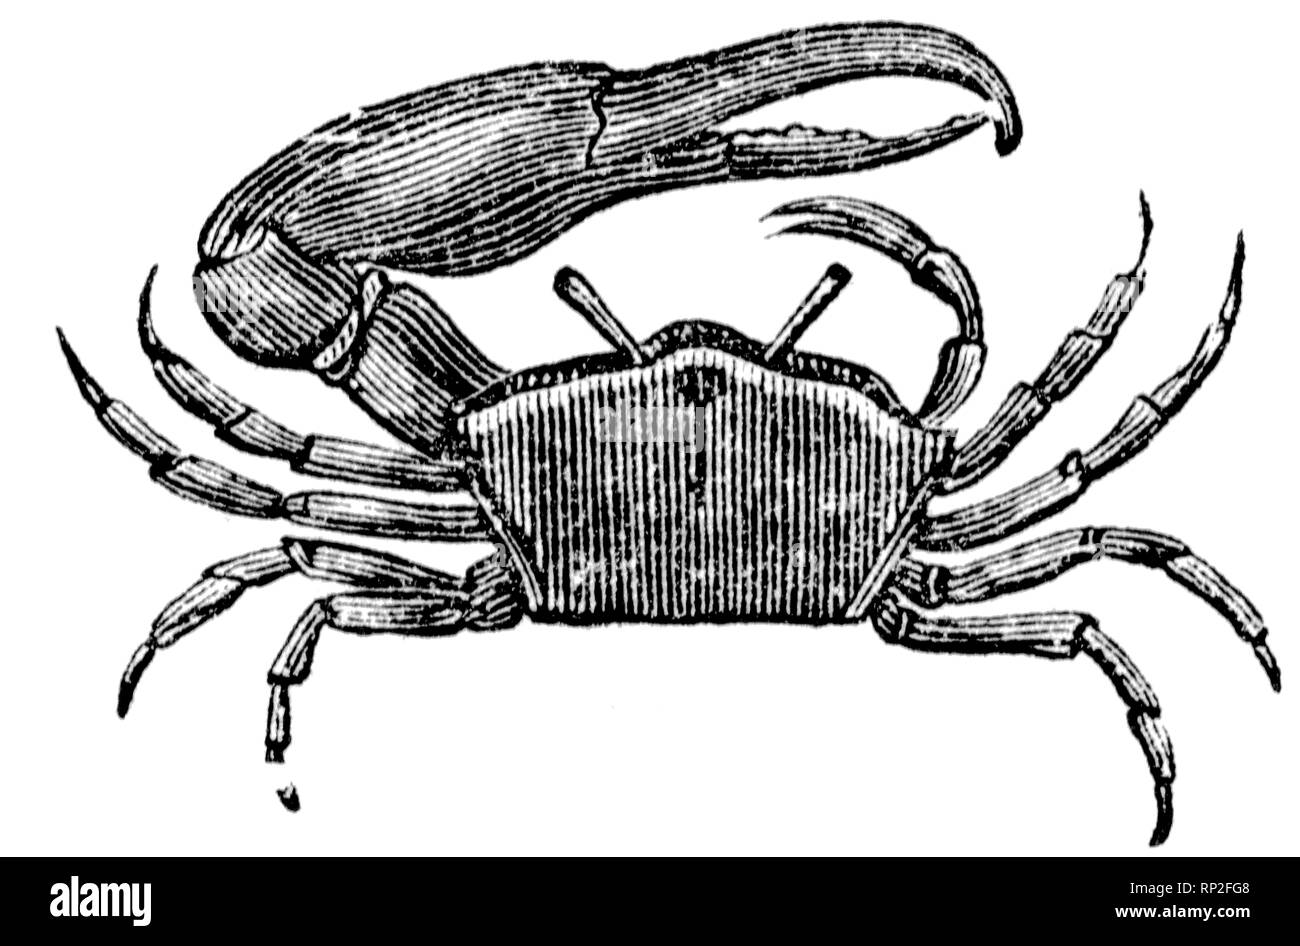 Shellfish Large Black and White Engraving Crustaceans Crabs 1845 Antique Print